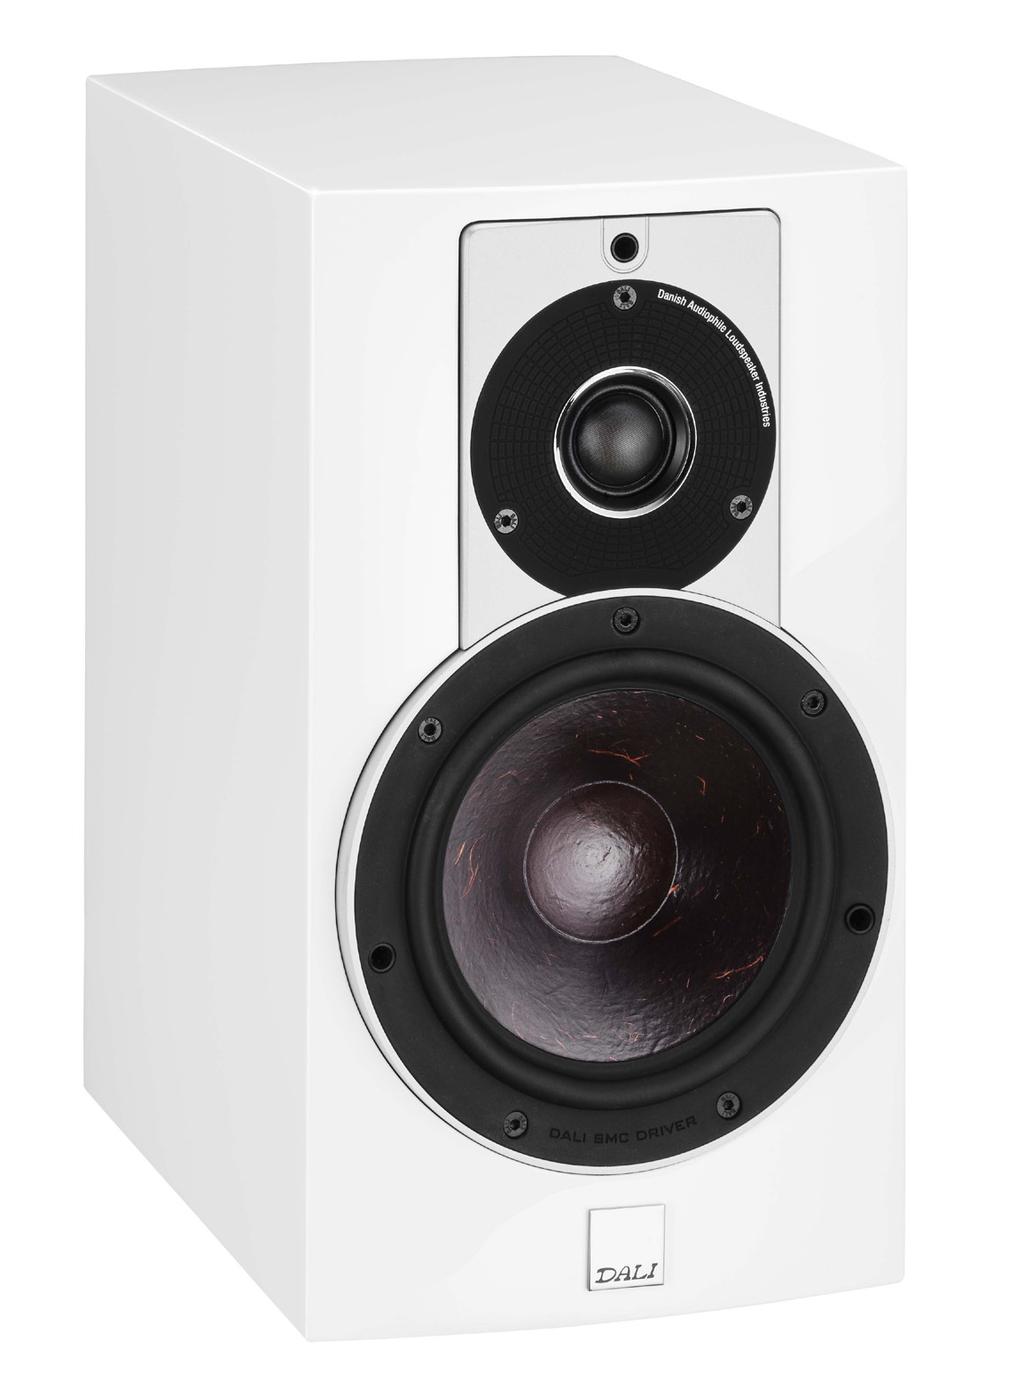 APPLICATION RUBICON 2 is a stand mounted speaker built around a 6½ inch low-loss woofer and a 29mm ultra light soft dome tweeter.